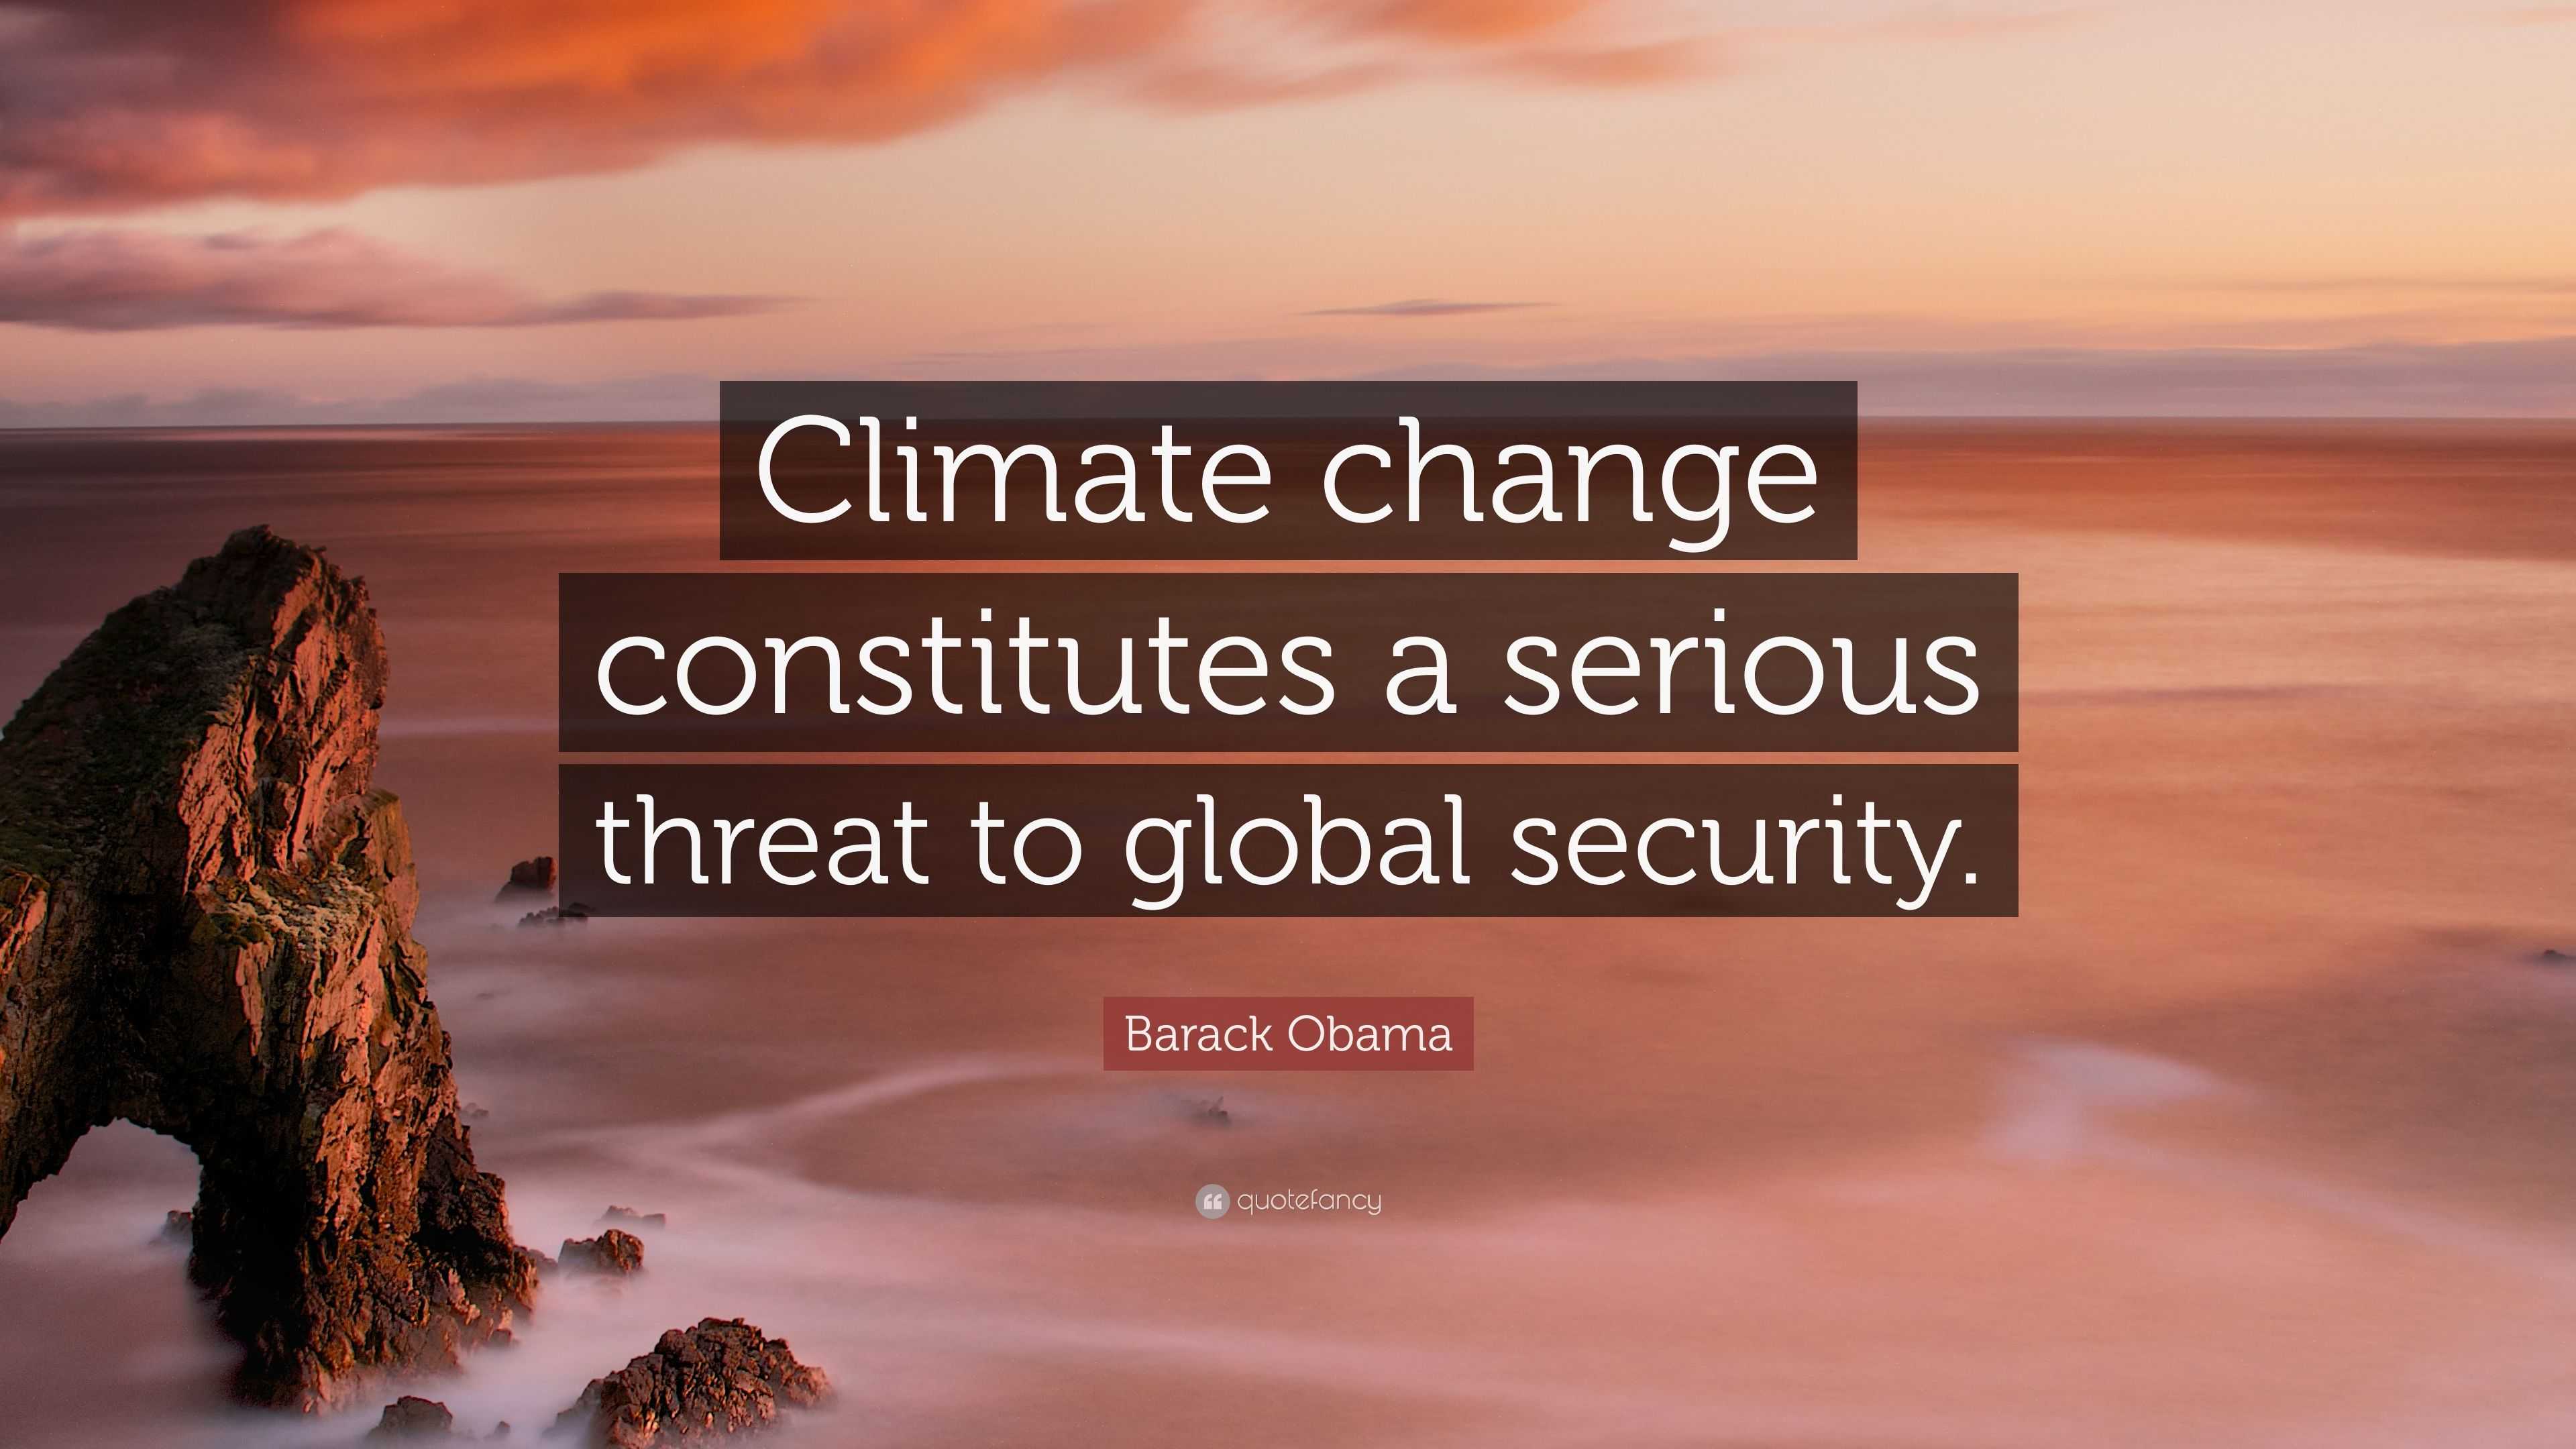 Barack Obama Quote: “Climate change constitutes a serious threat to ...